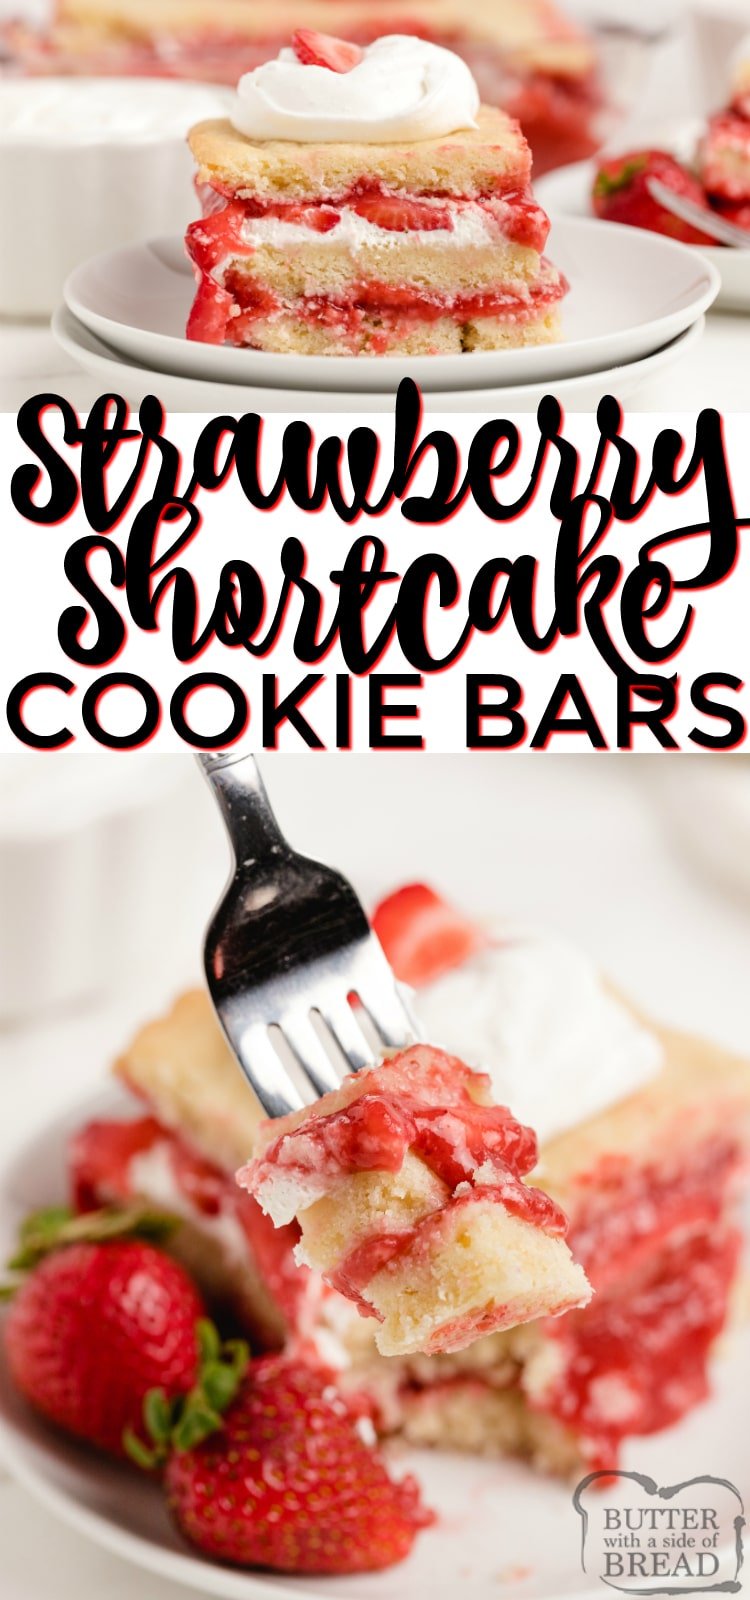 Strawberry Shortcake Bars are made with layers of sugar cookies, fresh strawberries, homemade strawberry syrup and sweetened whipped cream. These icebox cookie bars are somewhere in between traditional strawberry shortcake and fruit pizza.